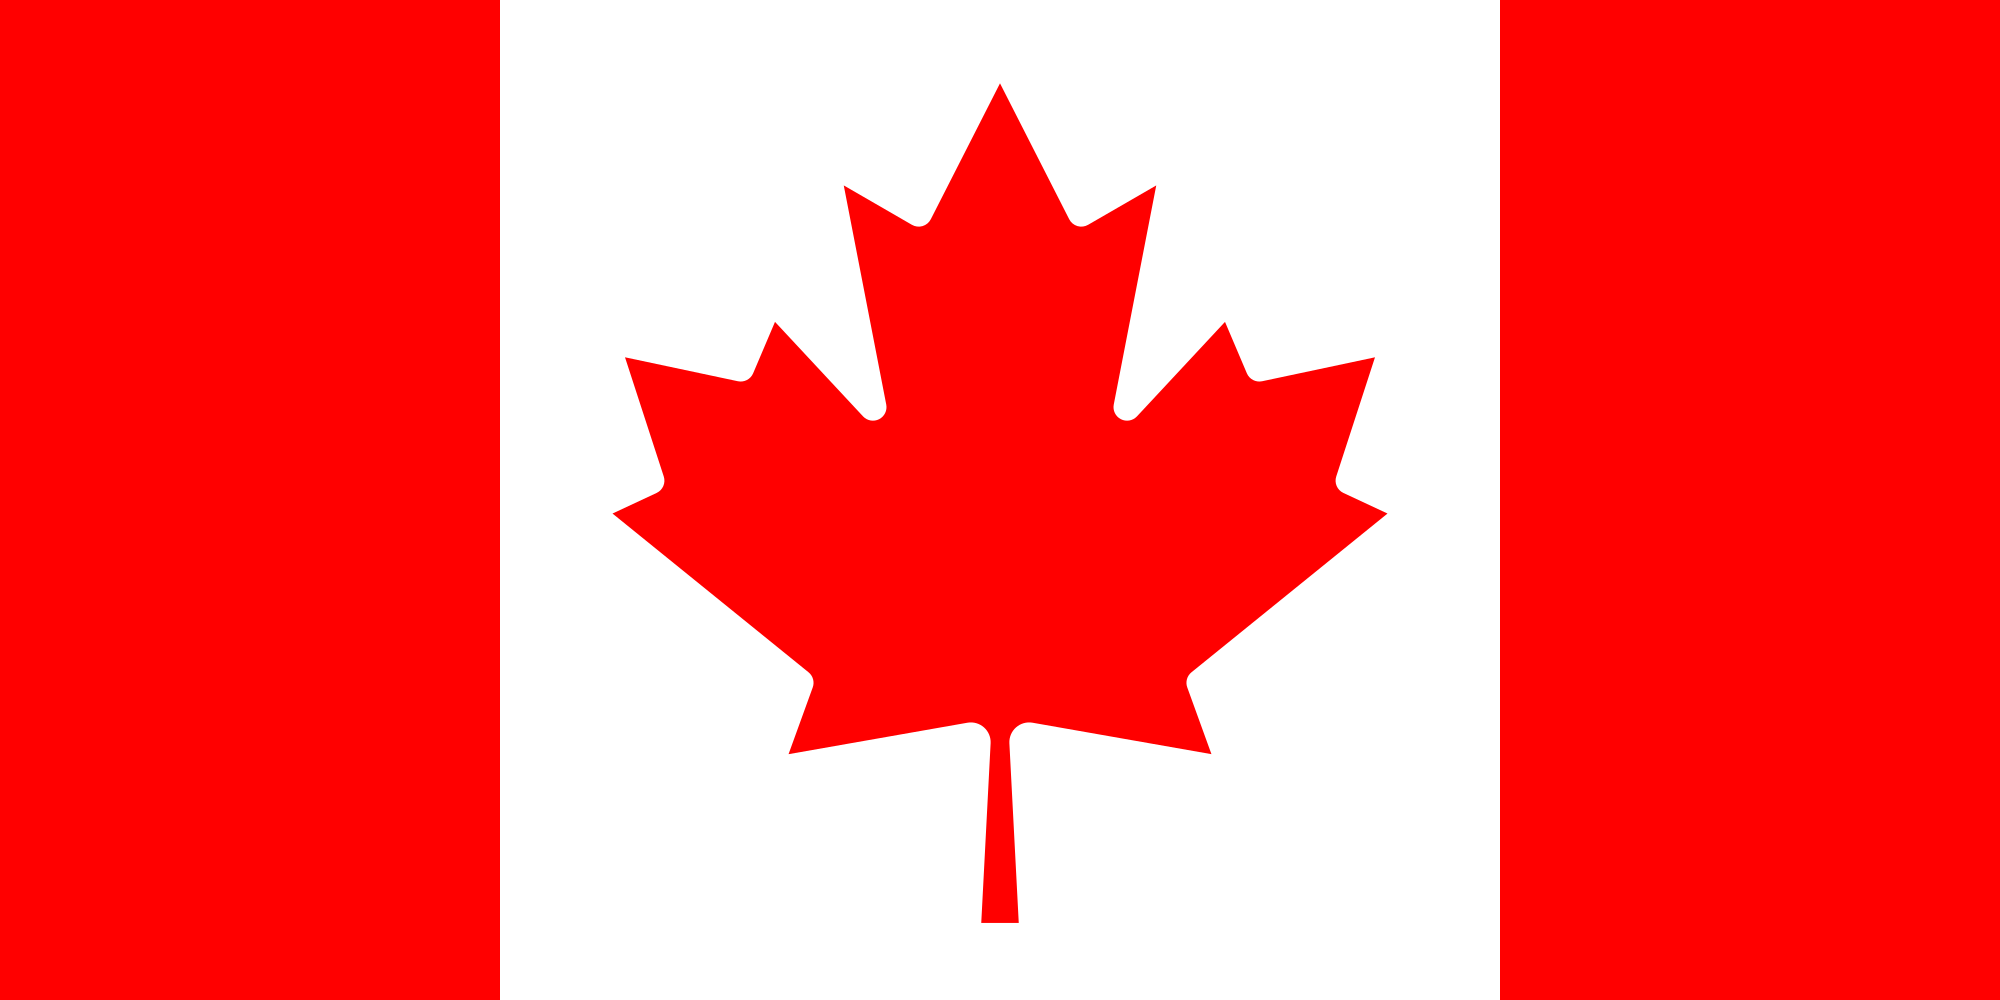 01. Government of Canada 